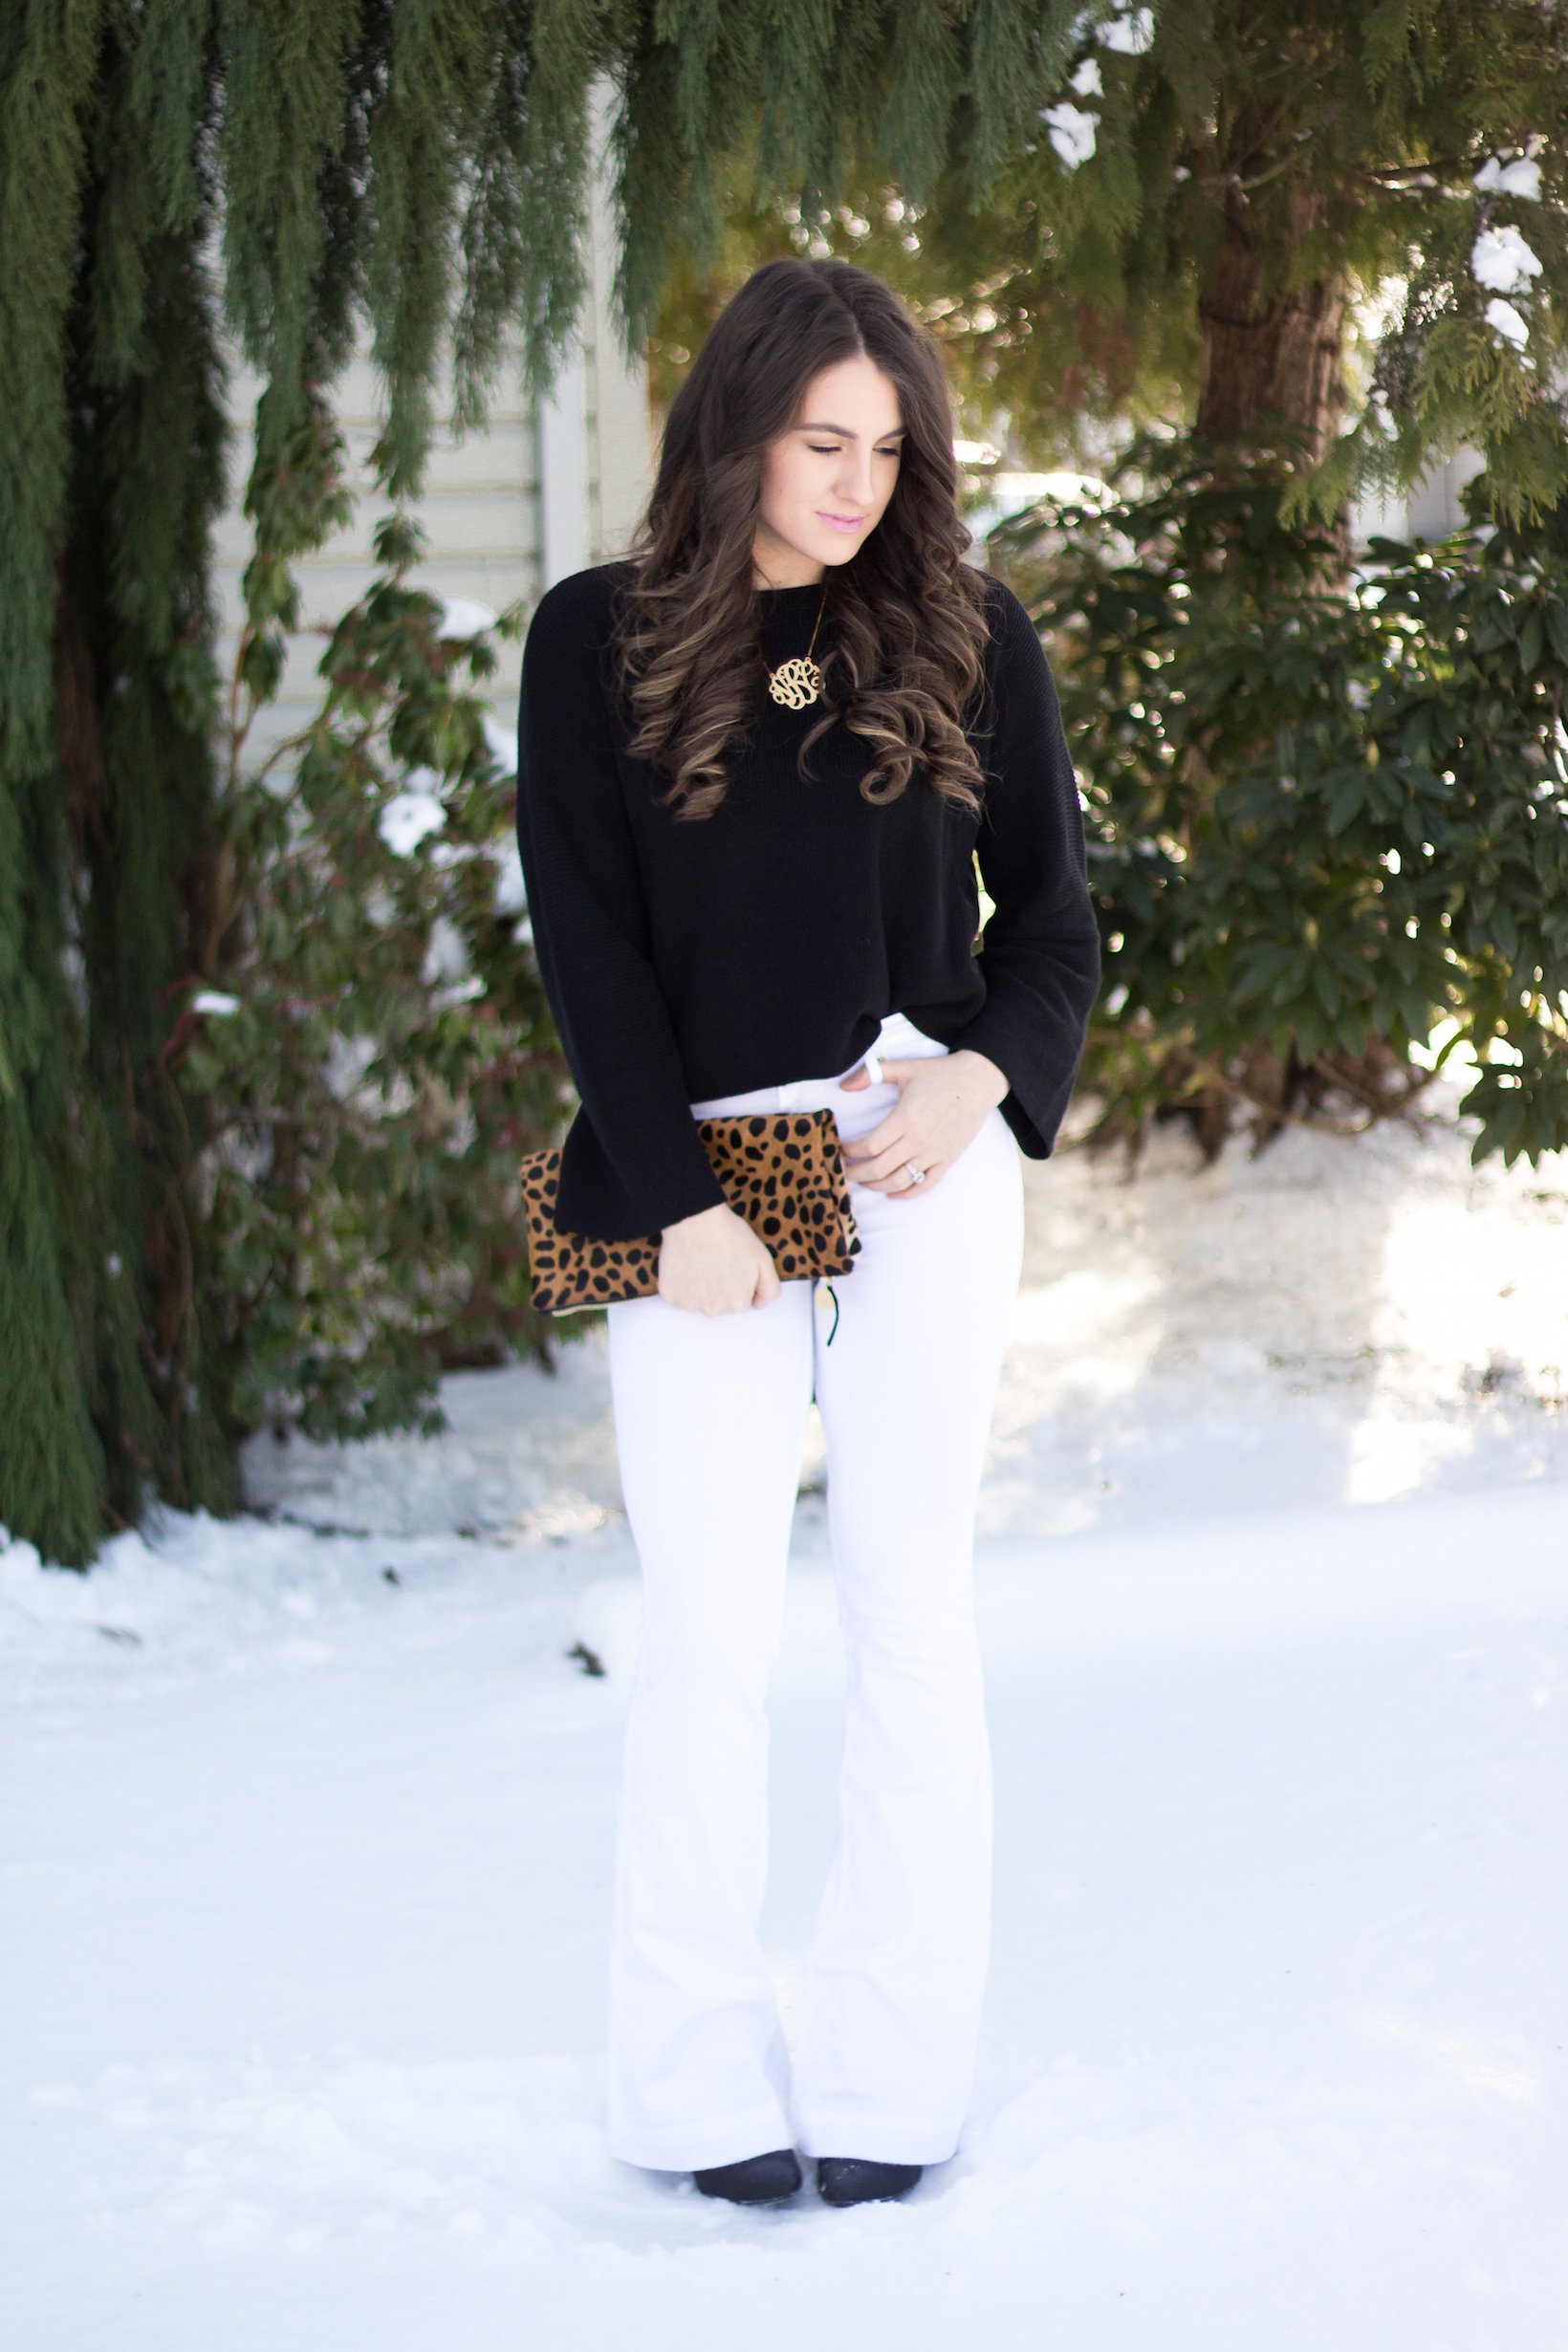 Winter white flares with black flared sleeve sweater for styling flares with confidence.